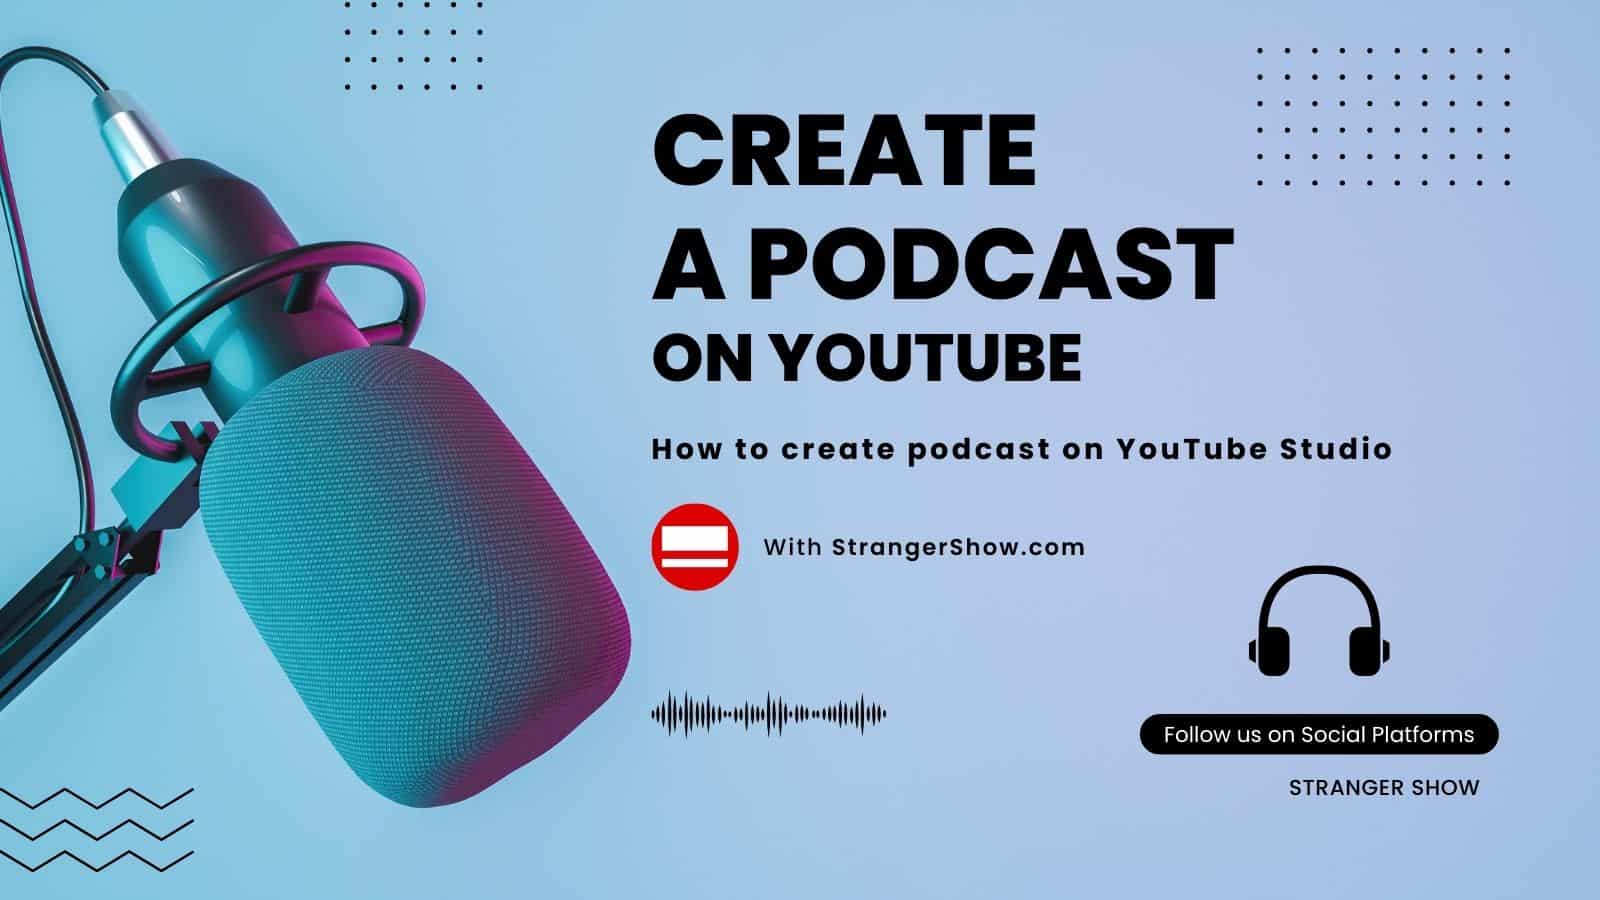 How to create a Podcast on YouTube studio